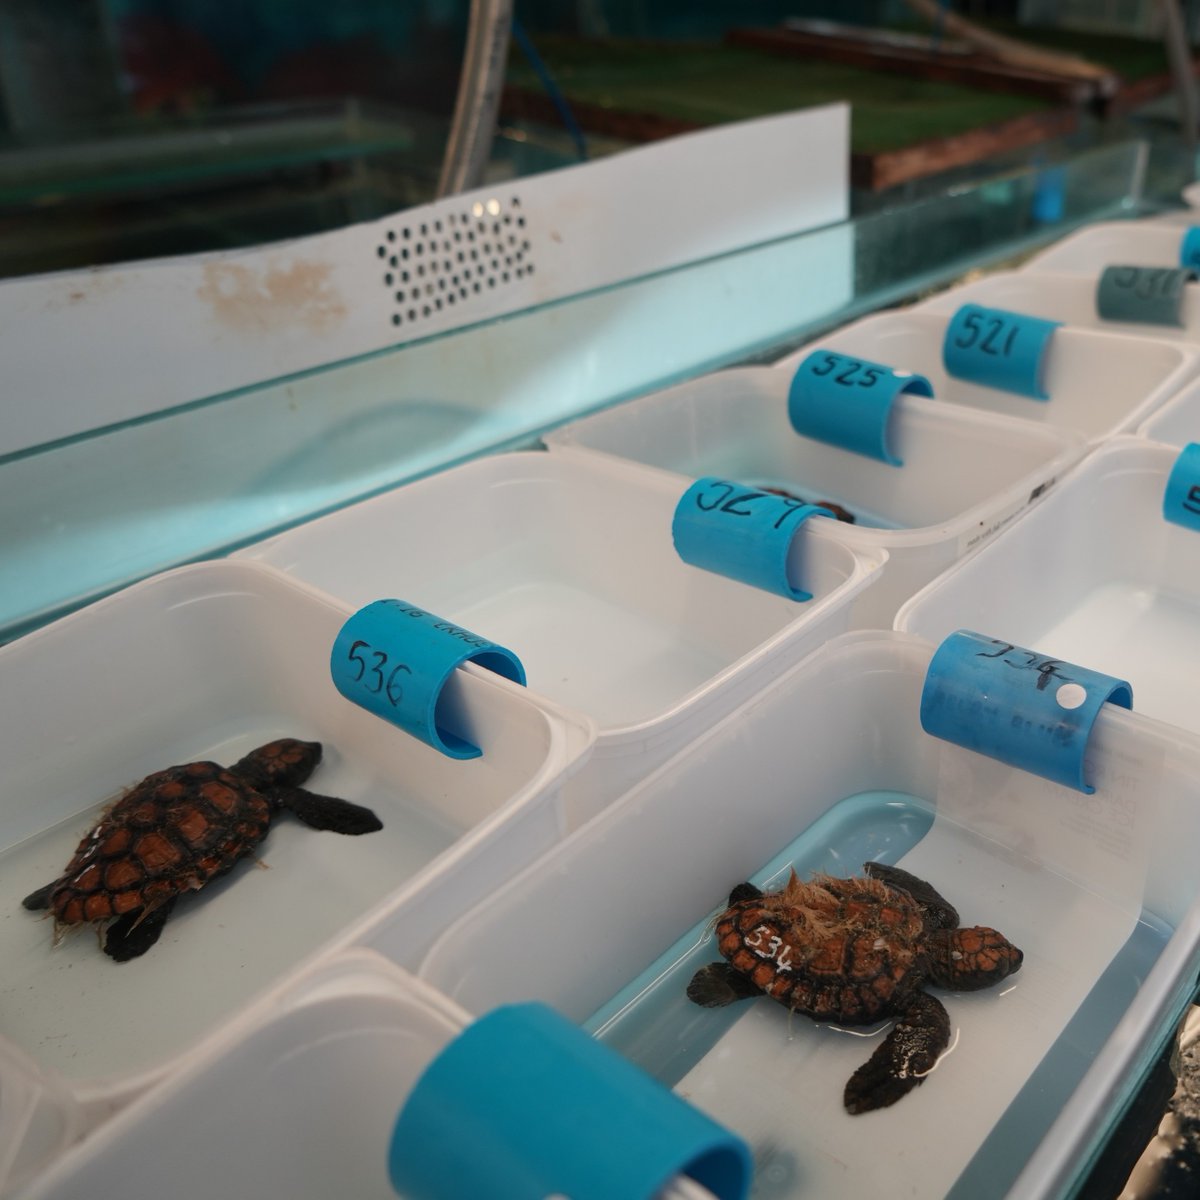 Our Turtle Conservation Centre has received over 530 loggerhead turtle hatchlings!🤯🐢 Each of these hatchlings is receiving treatment, care, yummy food, and time to recover before being released into the ocean when they're ready. 🩵 #twooceansaquarium #turtlerescue #turtle